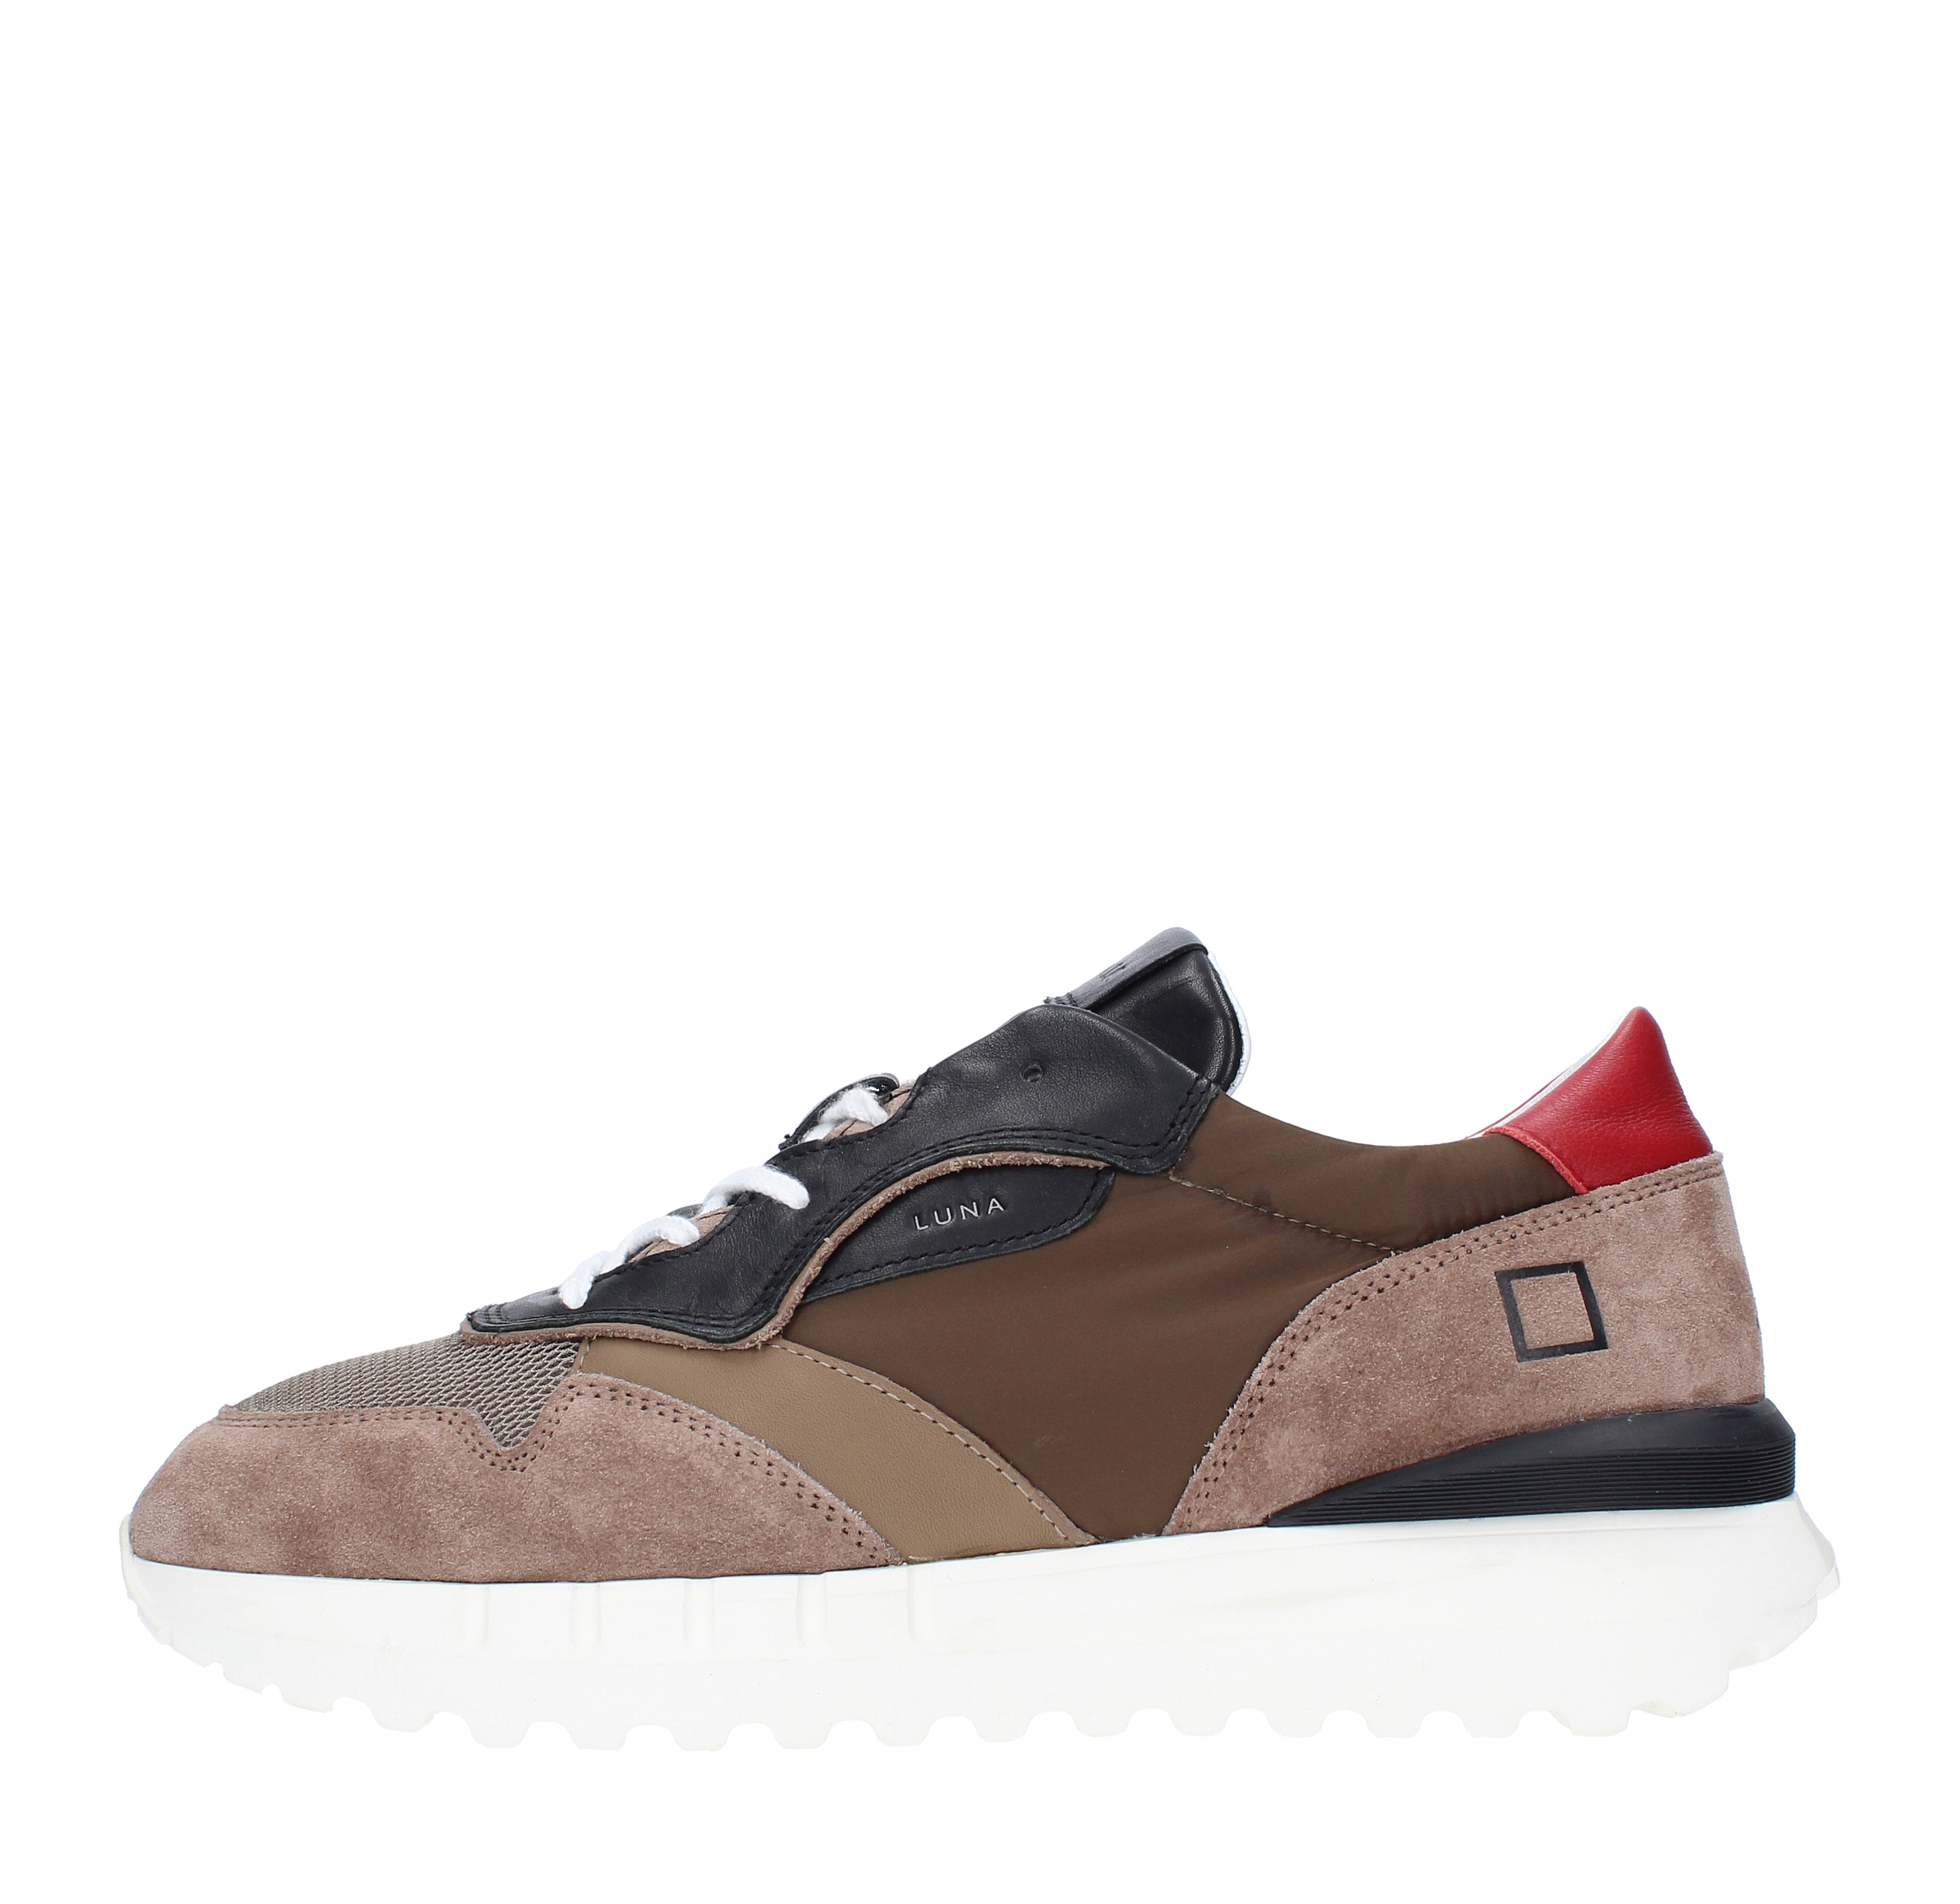 Trainers model M351-LN-CS-AD in leather, suede and fabric D.A.T.E. | M351-LN-CS-ADMULTICOLOR